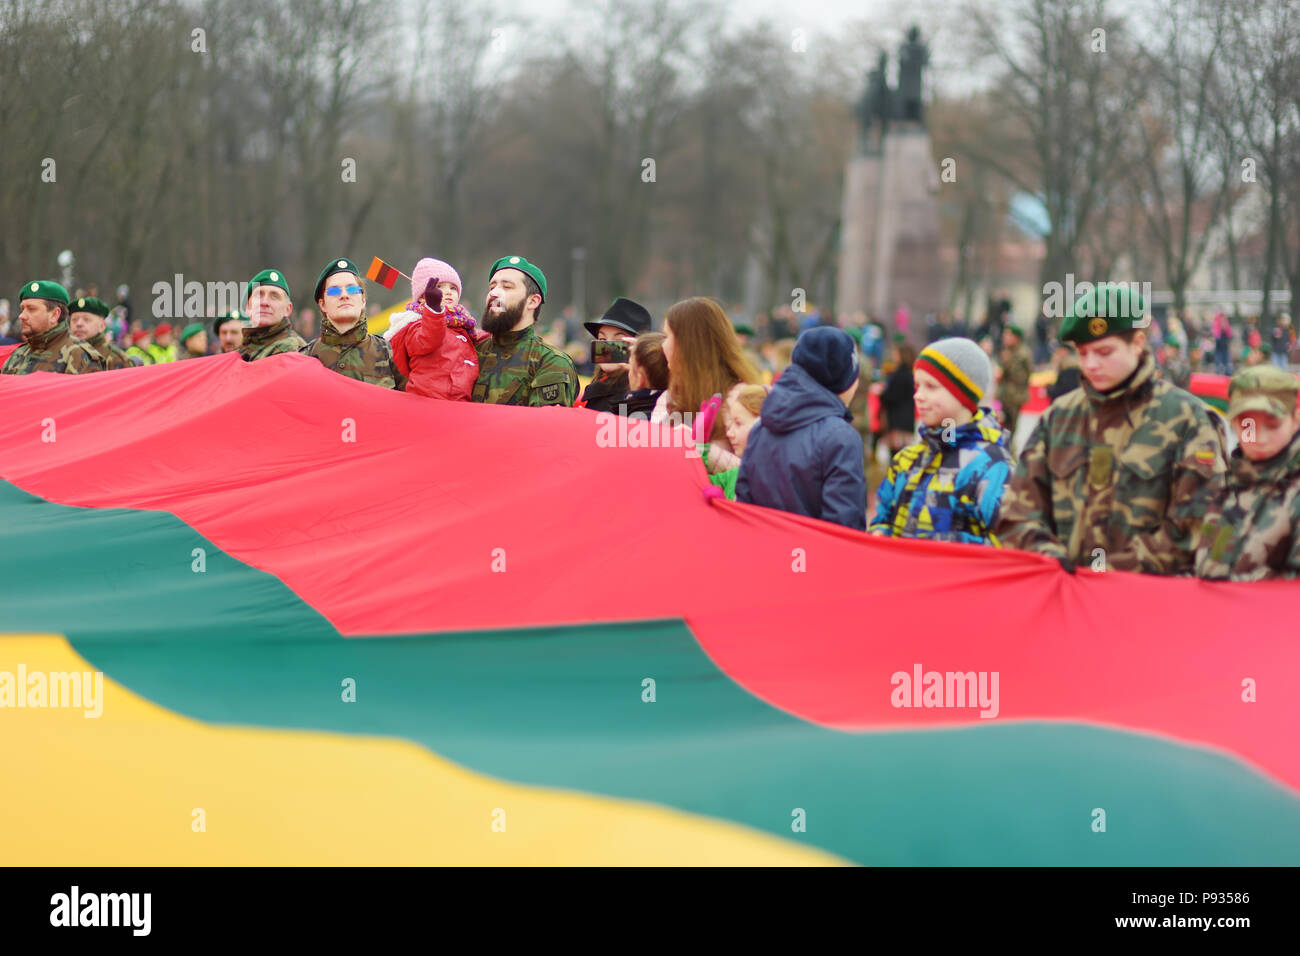 VILNIUS, LITHUANIA - MARCH 11, 2017: Thousands of people taking part in a festive events as Lithuania marked the 27th anniversary of its independence  Stock Photo